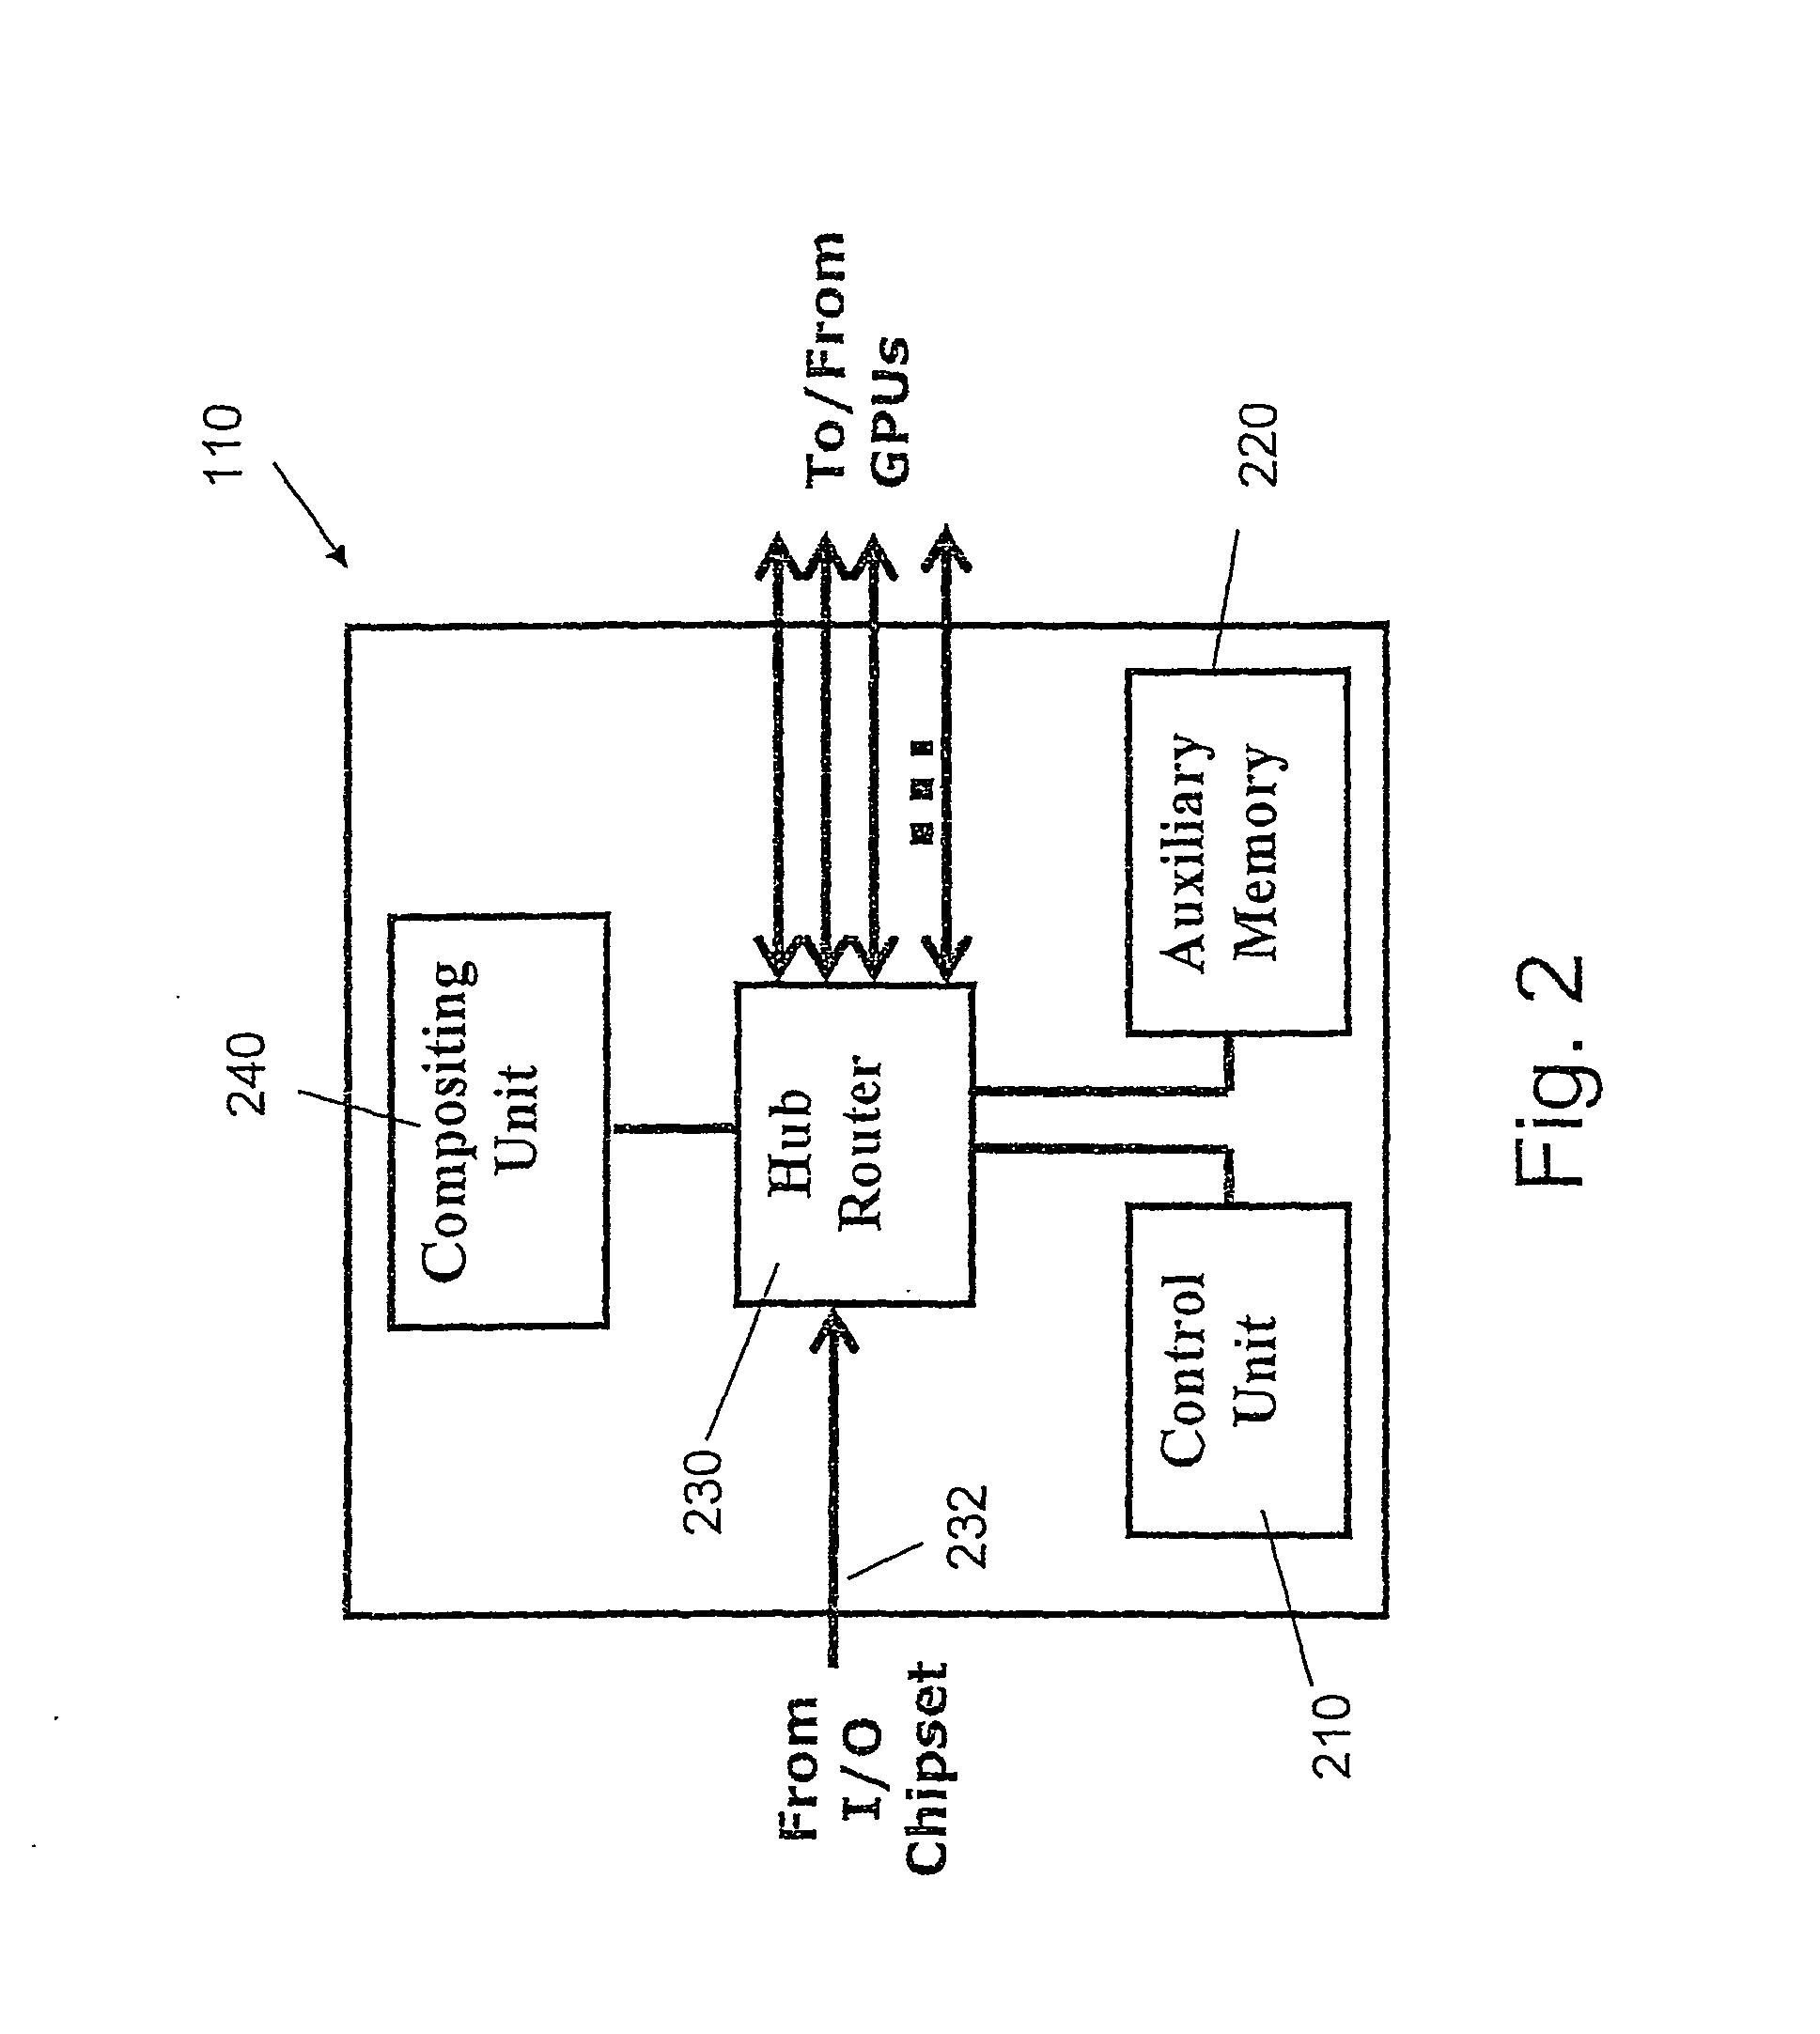 Method and System for Multiple 3-D Graphic Pipeline Over a Pc Bus